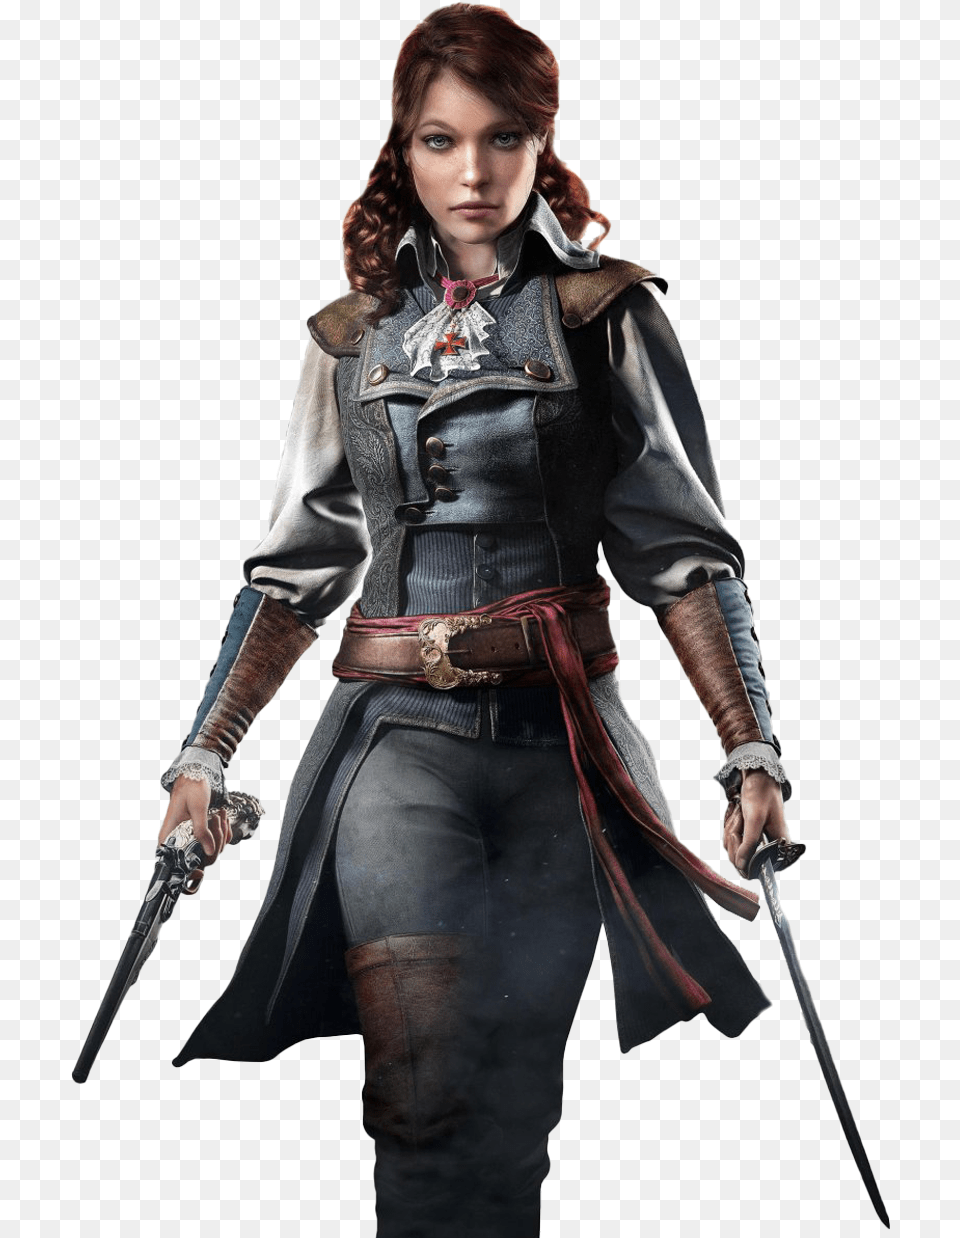 Assassin S Creed Odyssey Image, Weapon, Clothing, Coat, Costume Free Png